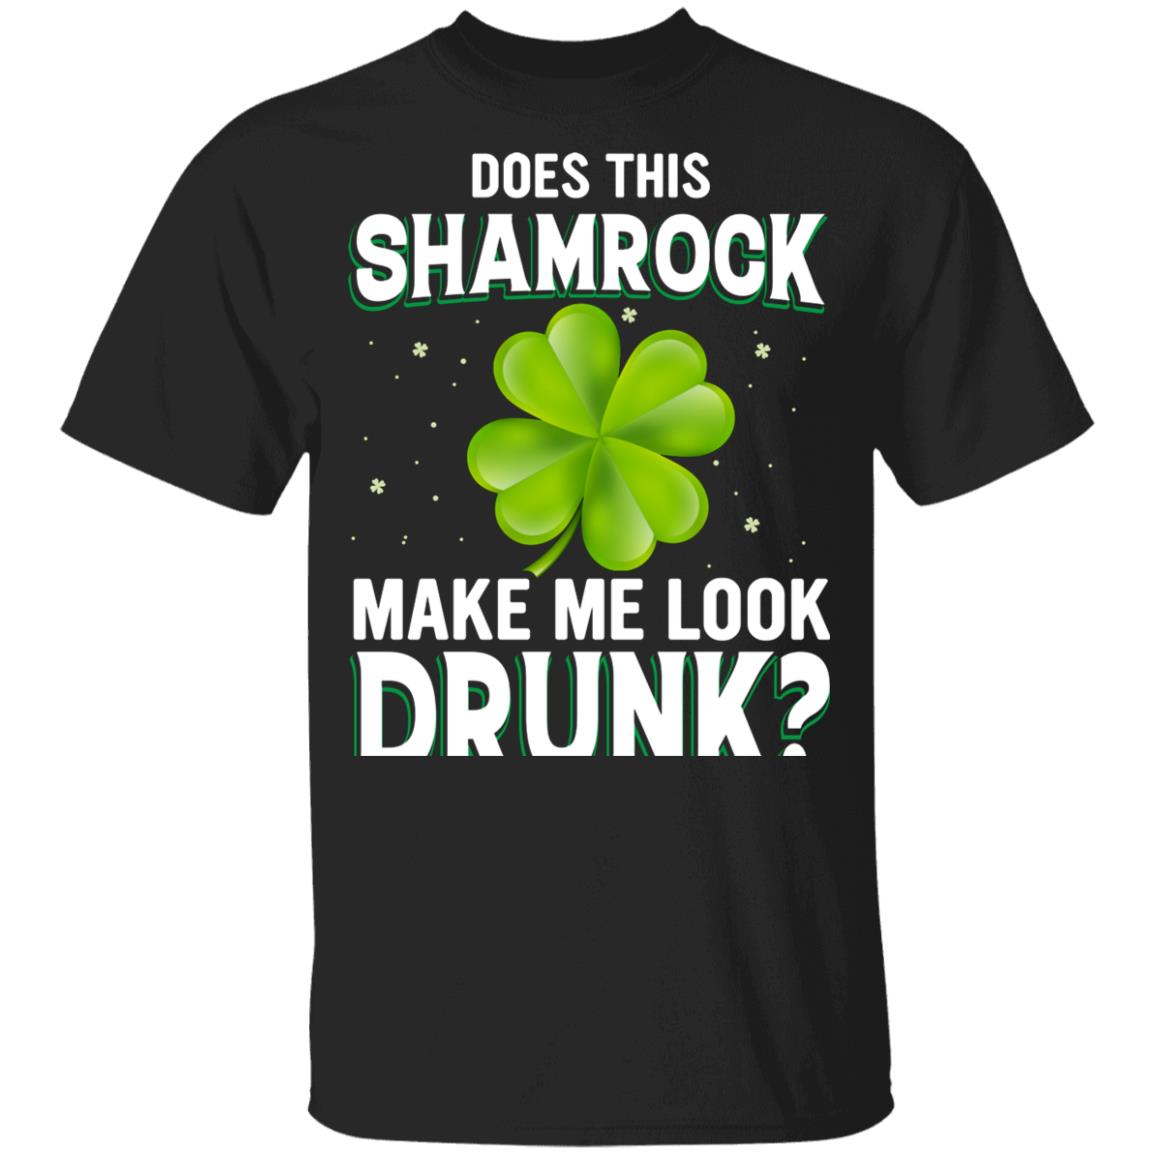 Does This Shamrock Make Me Look Drunk Funny Shirt